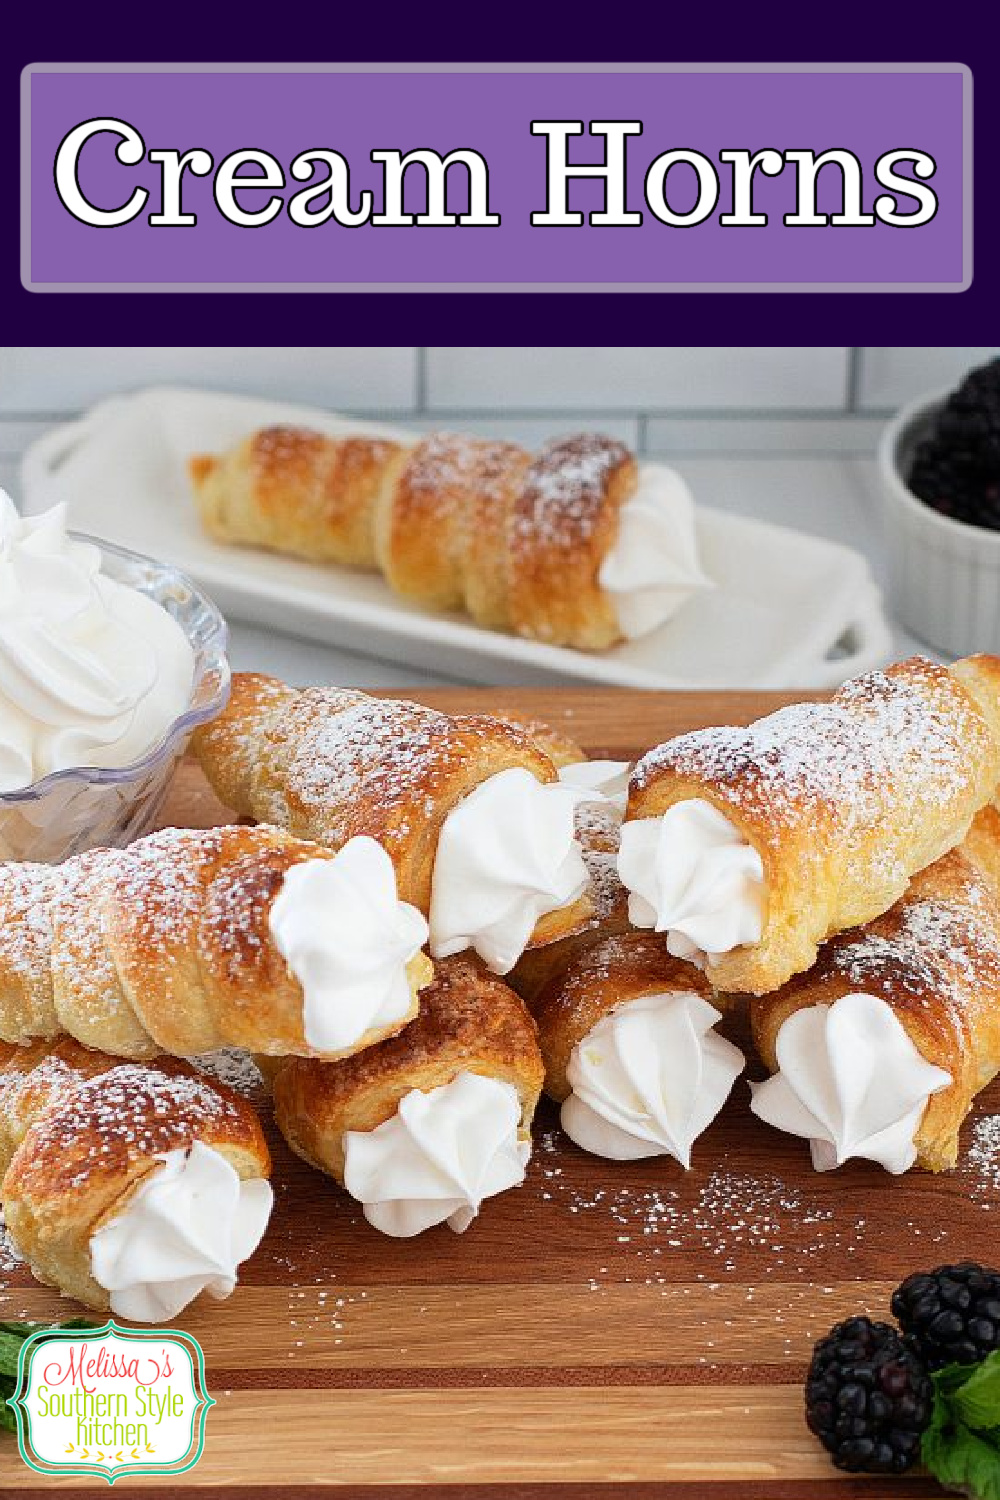 These puff pastry Cream Horns are filled with fresh whipped cream and dusted with powdered sugar for a handheld bakery-style treat #creamhorns #puffpastryrecipes #puffpastryhorns #cornicopia #whippedcreamfilledcreamhorns #southerndesserts #puffpastrydesserts